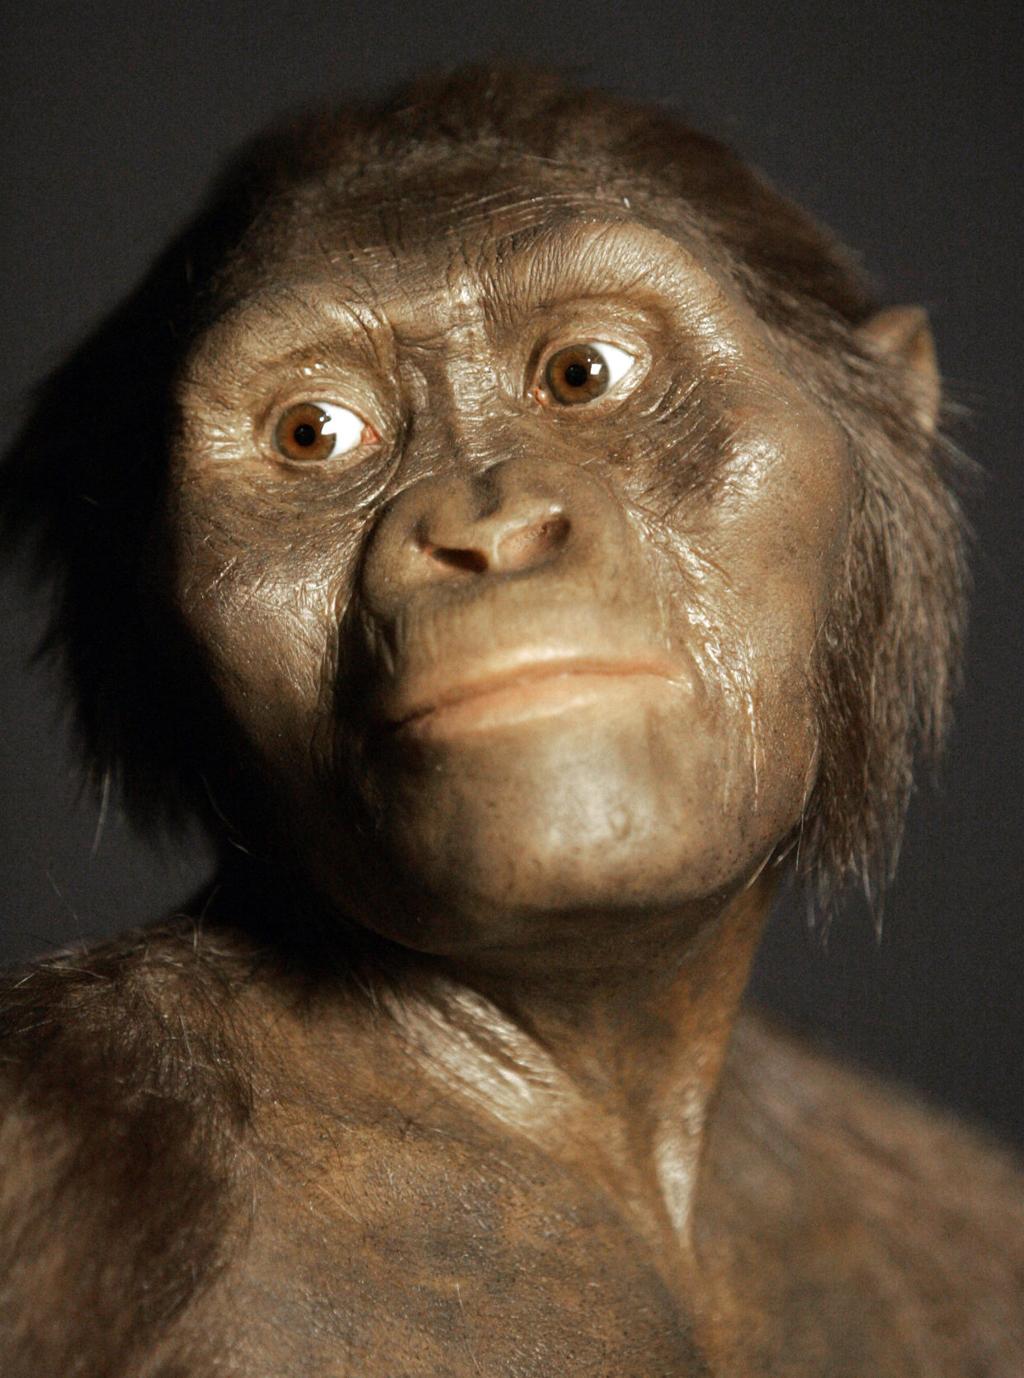 Superstar Pre-Human 'Lucy' Fell From a Tree, Study Finds